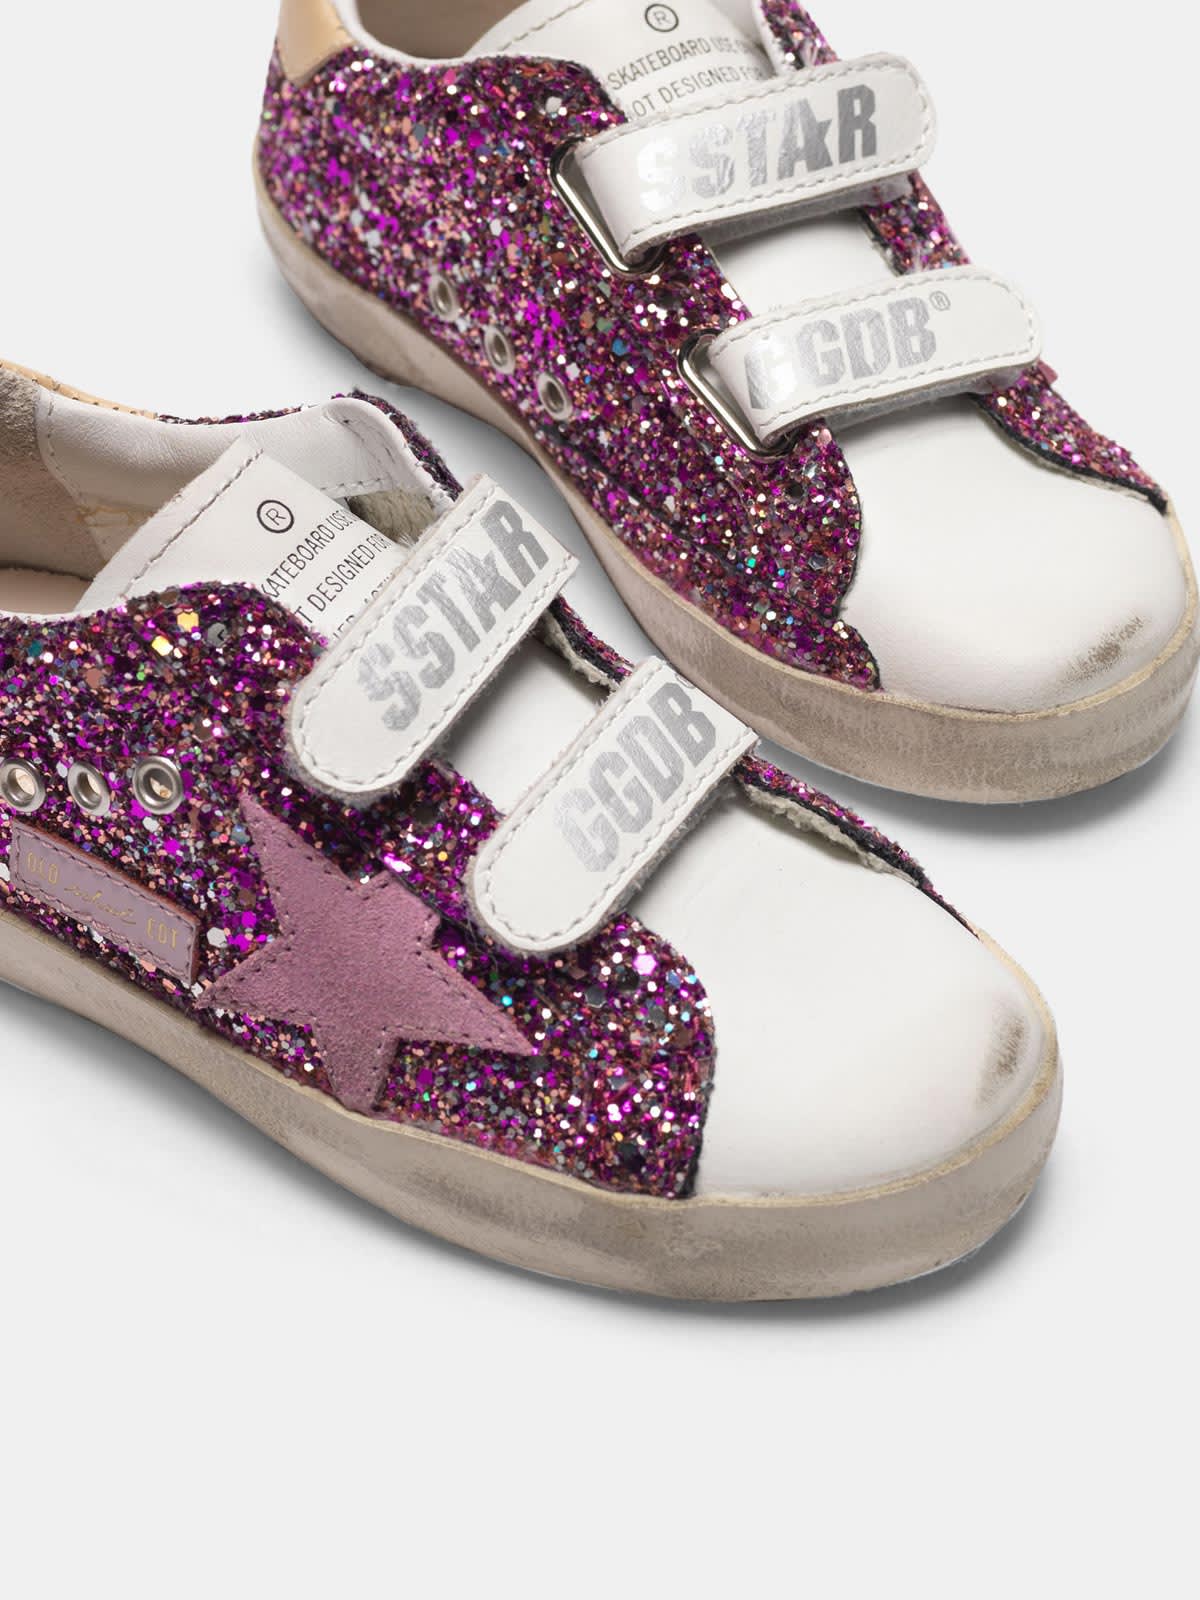 Old School sneakers with fuchsia glitter and pink star